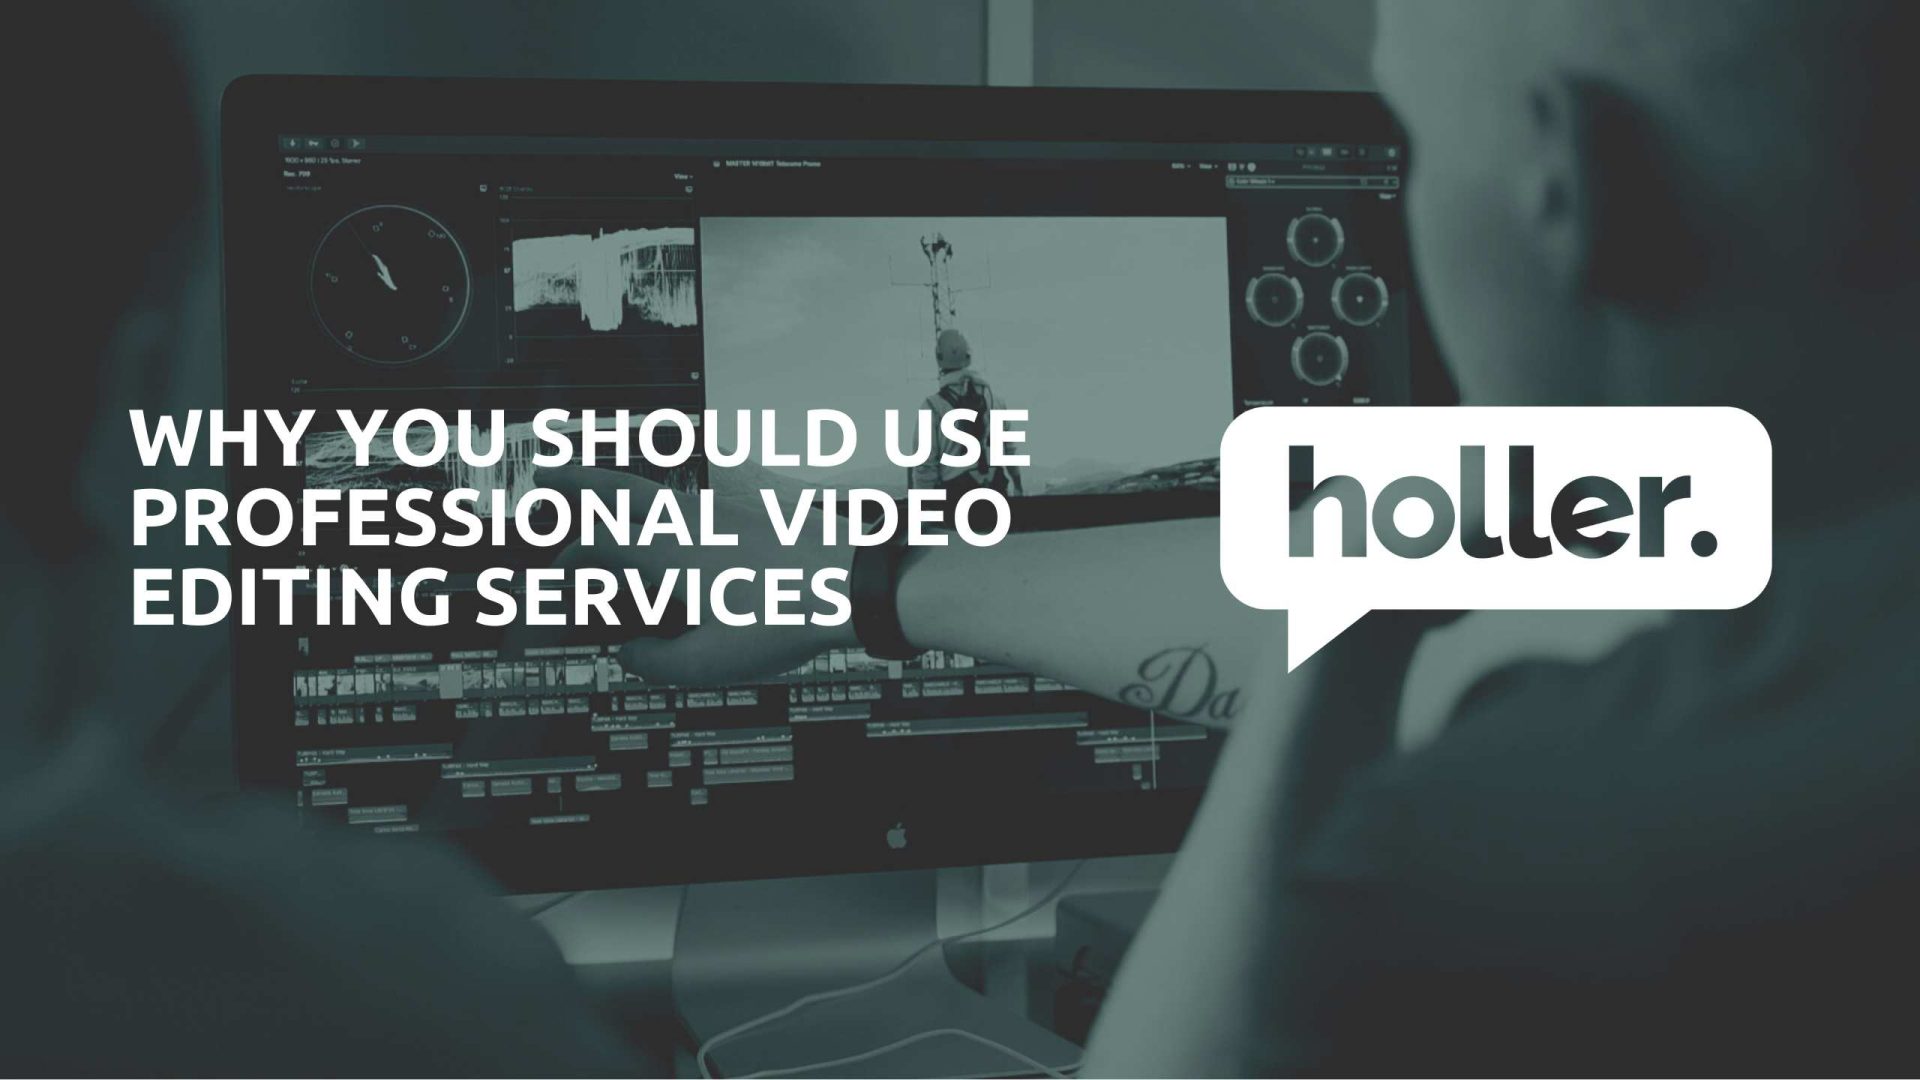 professional video editing services